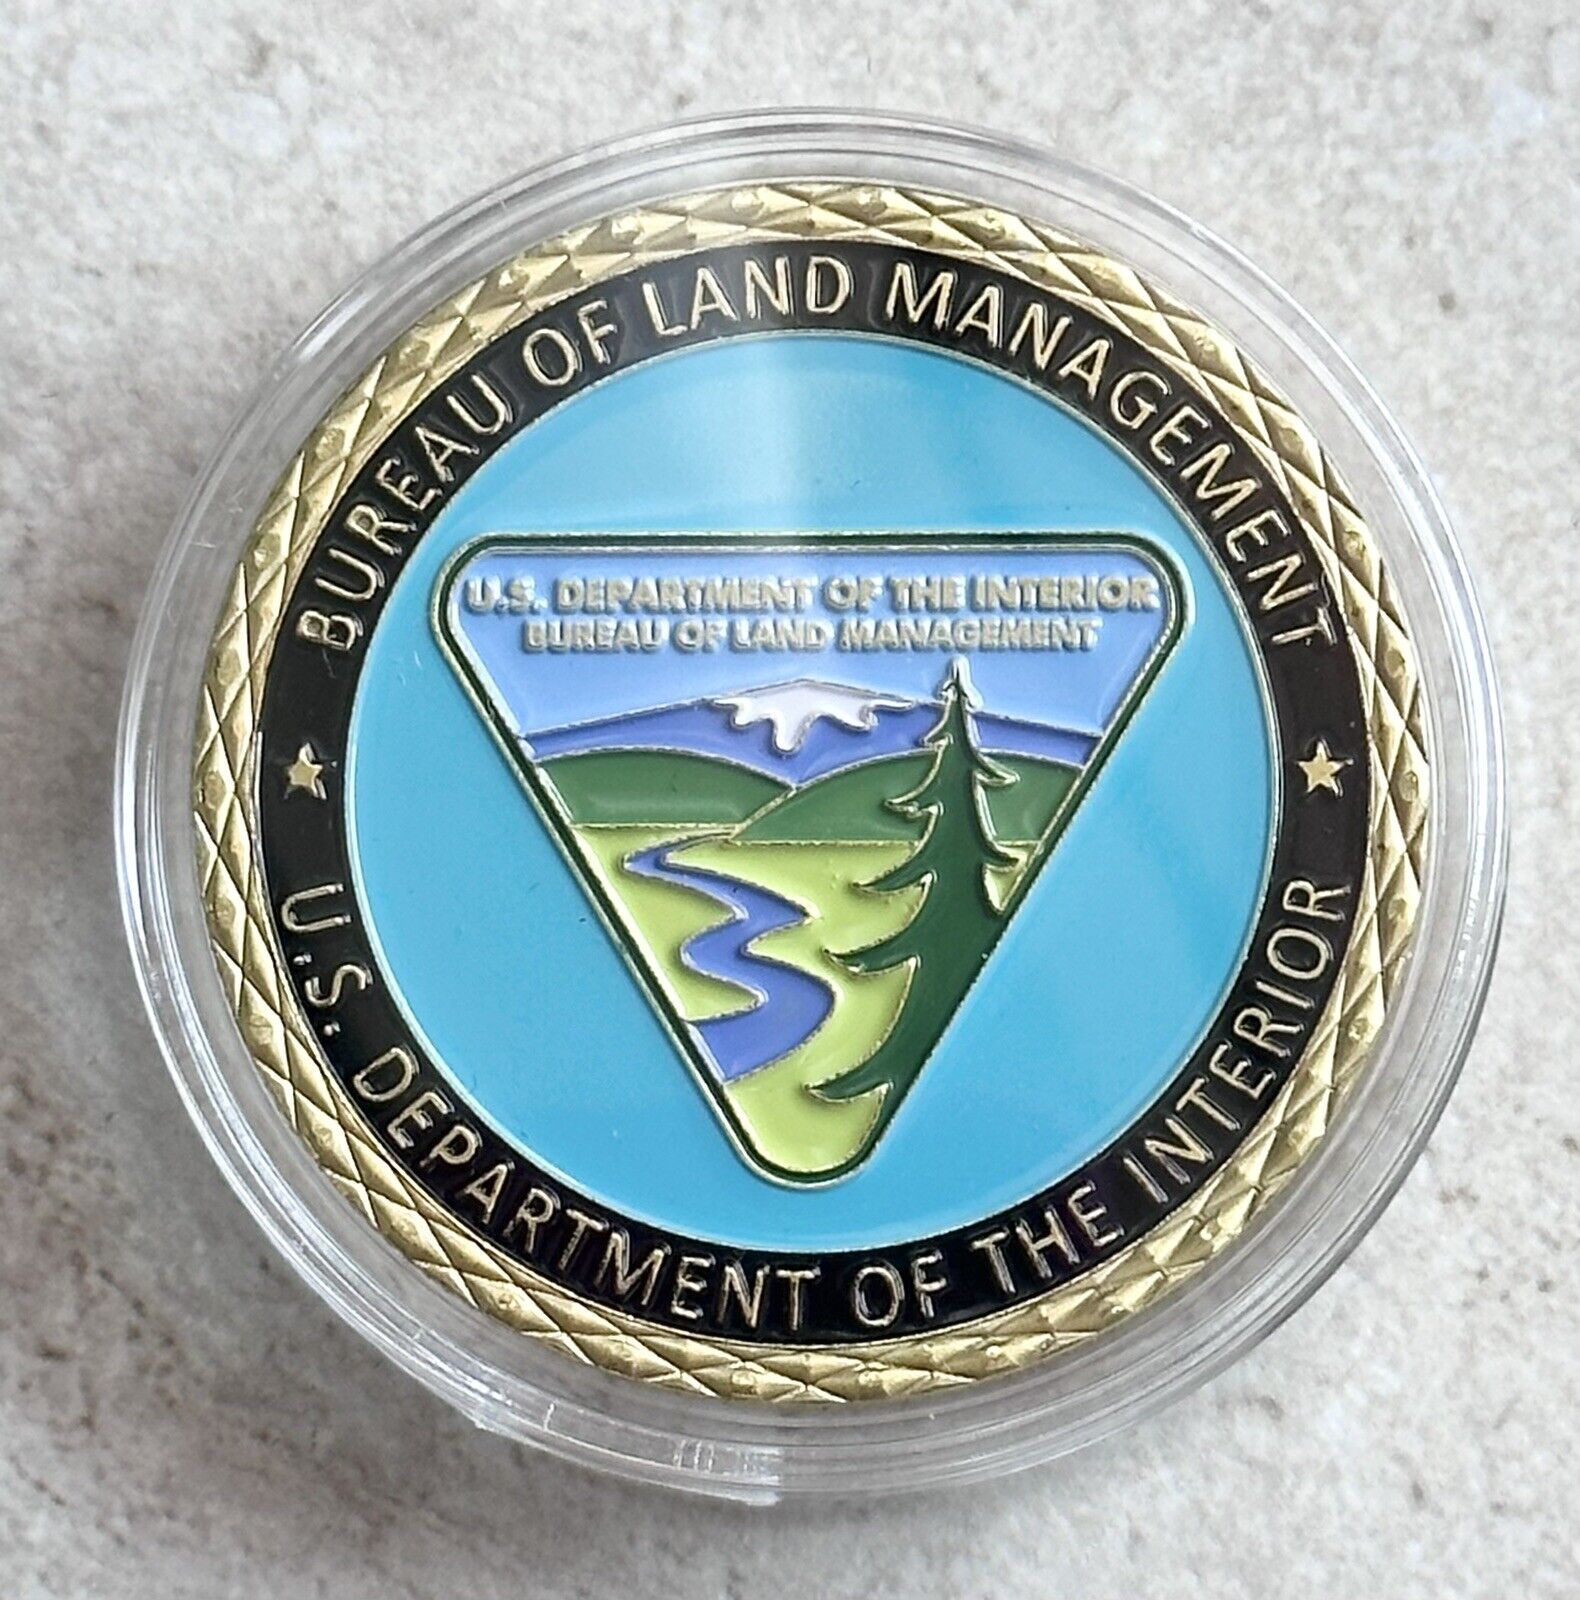 BUREAU OF LAND MANAGEMENT/US DEPARTMENT OF THE INTERIOR-Challenge Coin